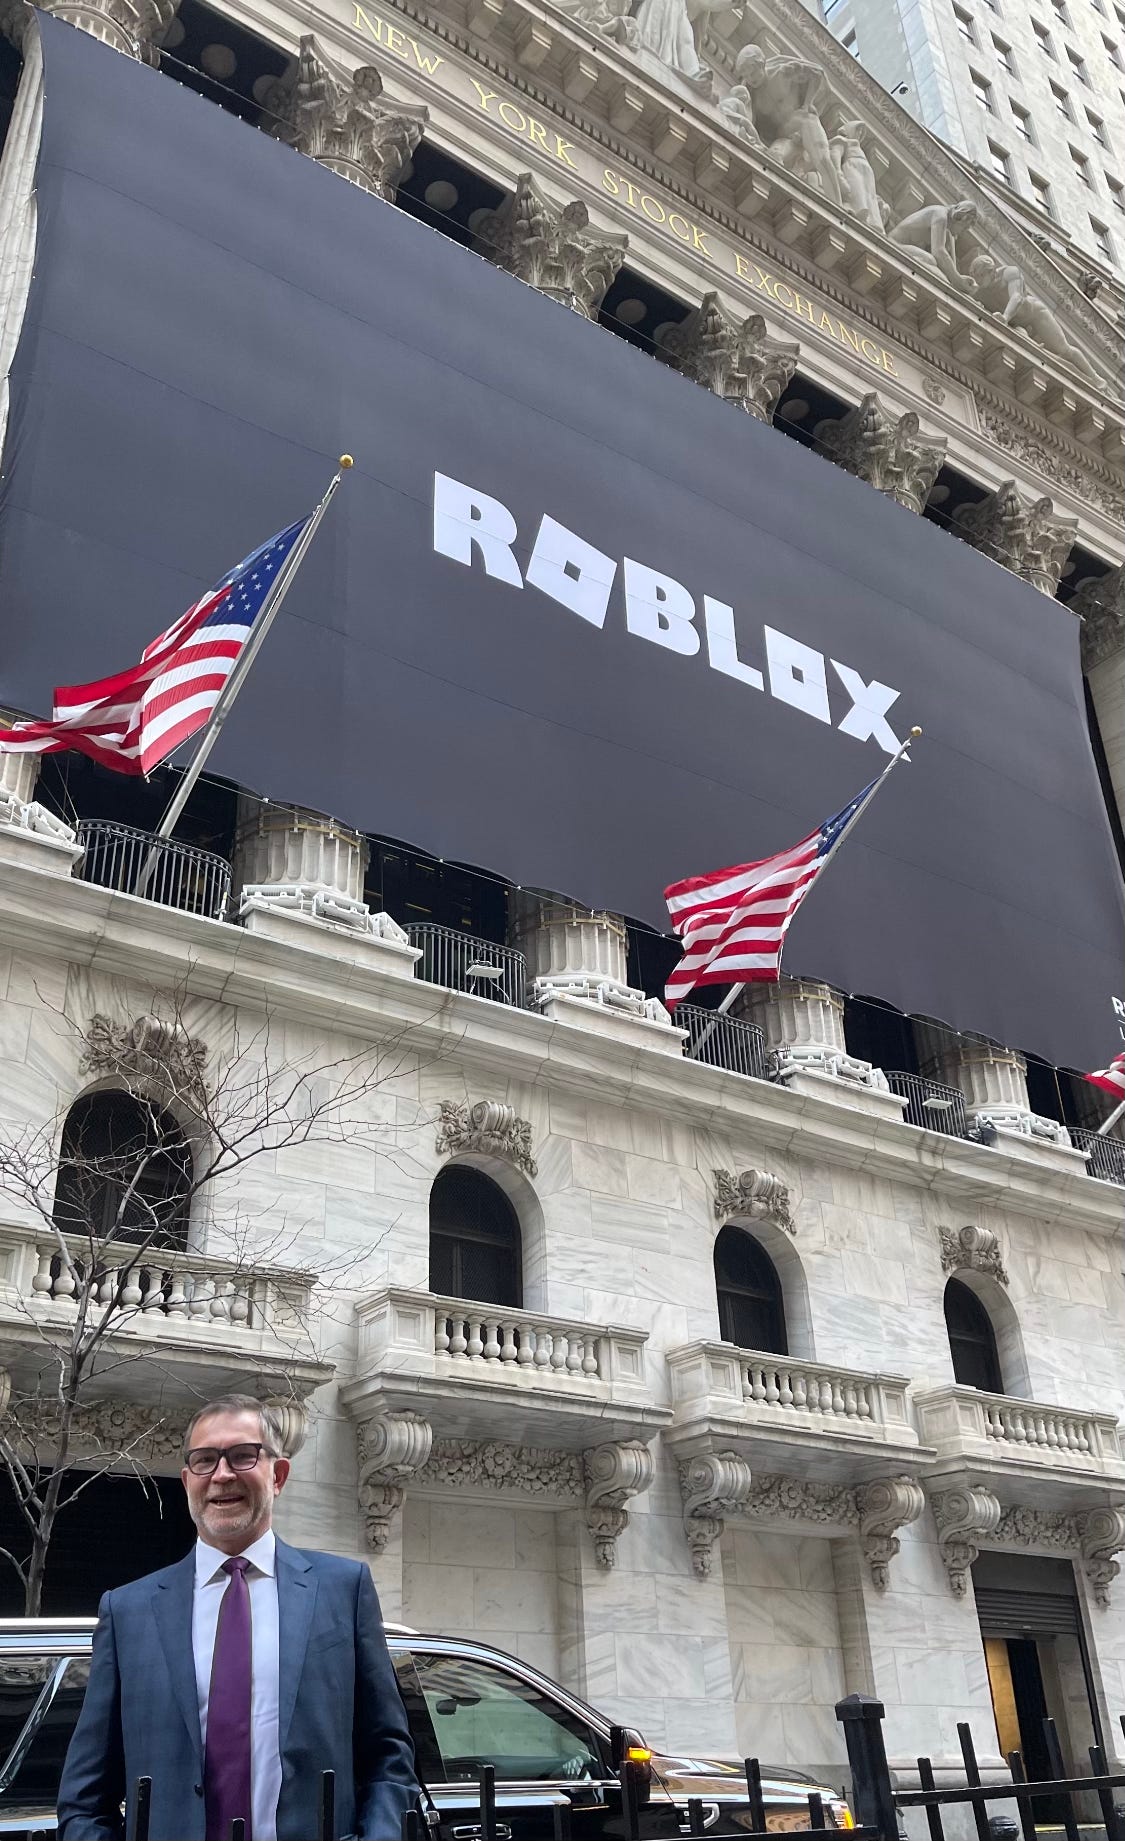 ROBLOX Announces The 'Big' Announcement, ROBLOX Now Implemented A Brand New  Logo – ROBLOX Space – A ROBLOX Blog